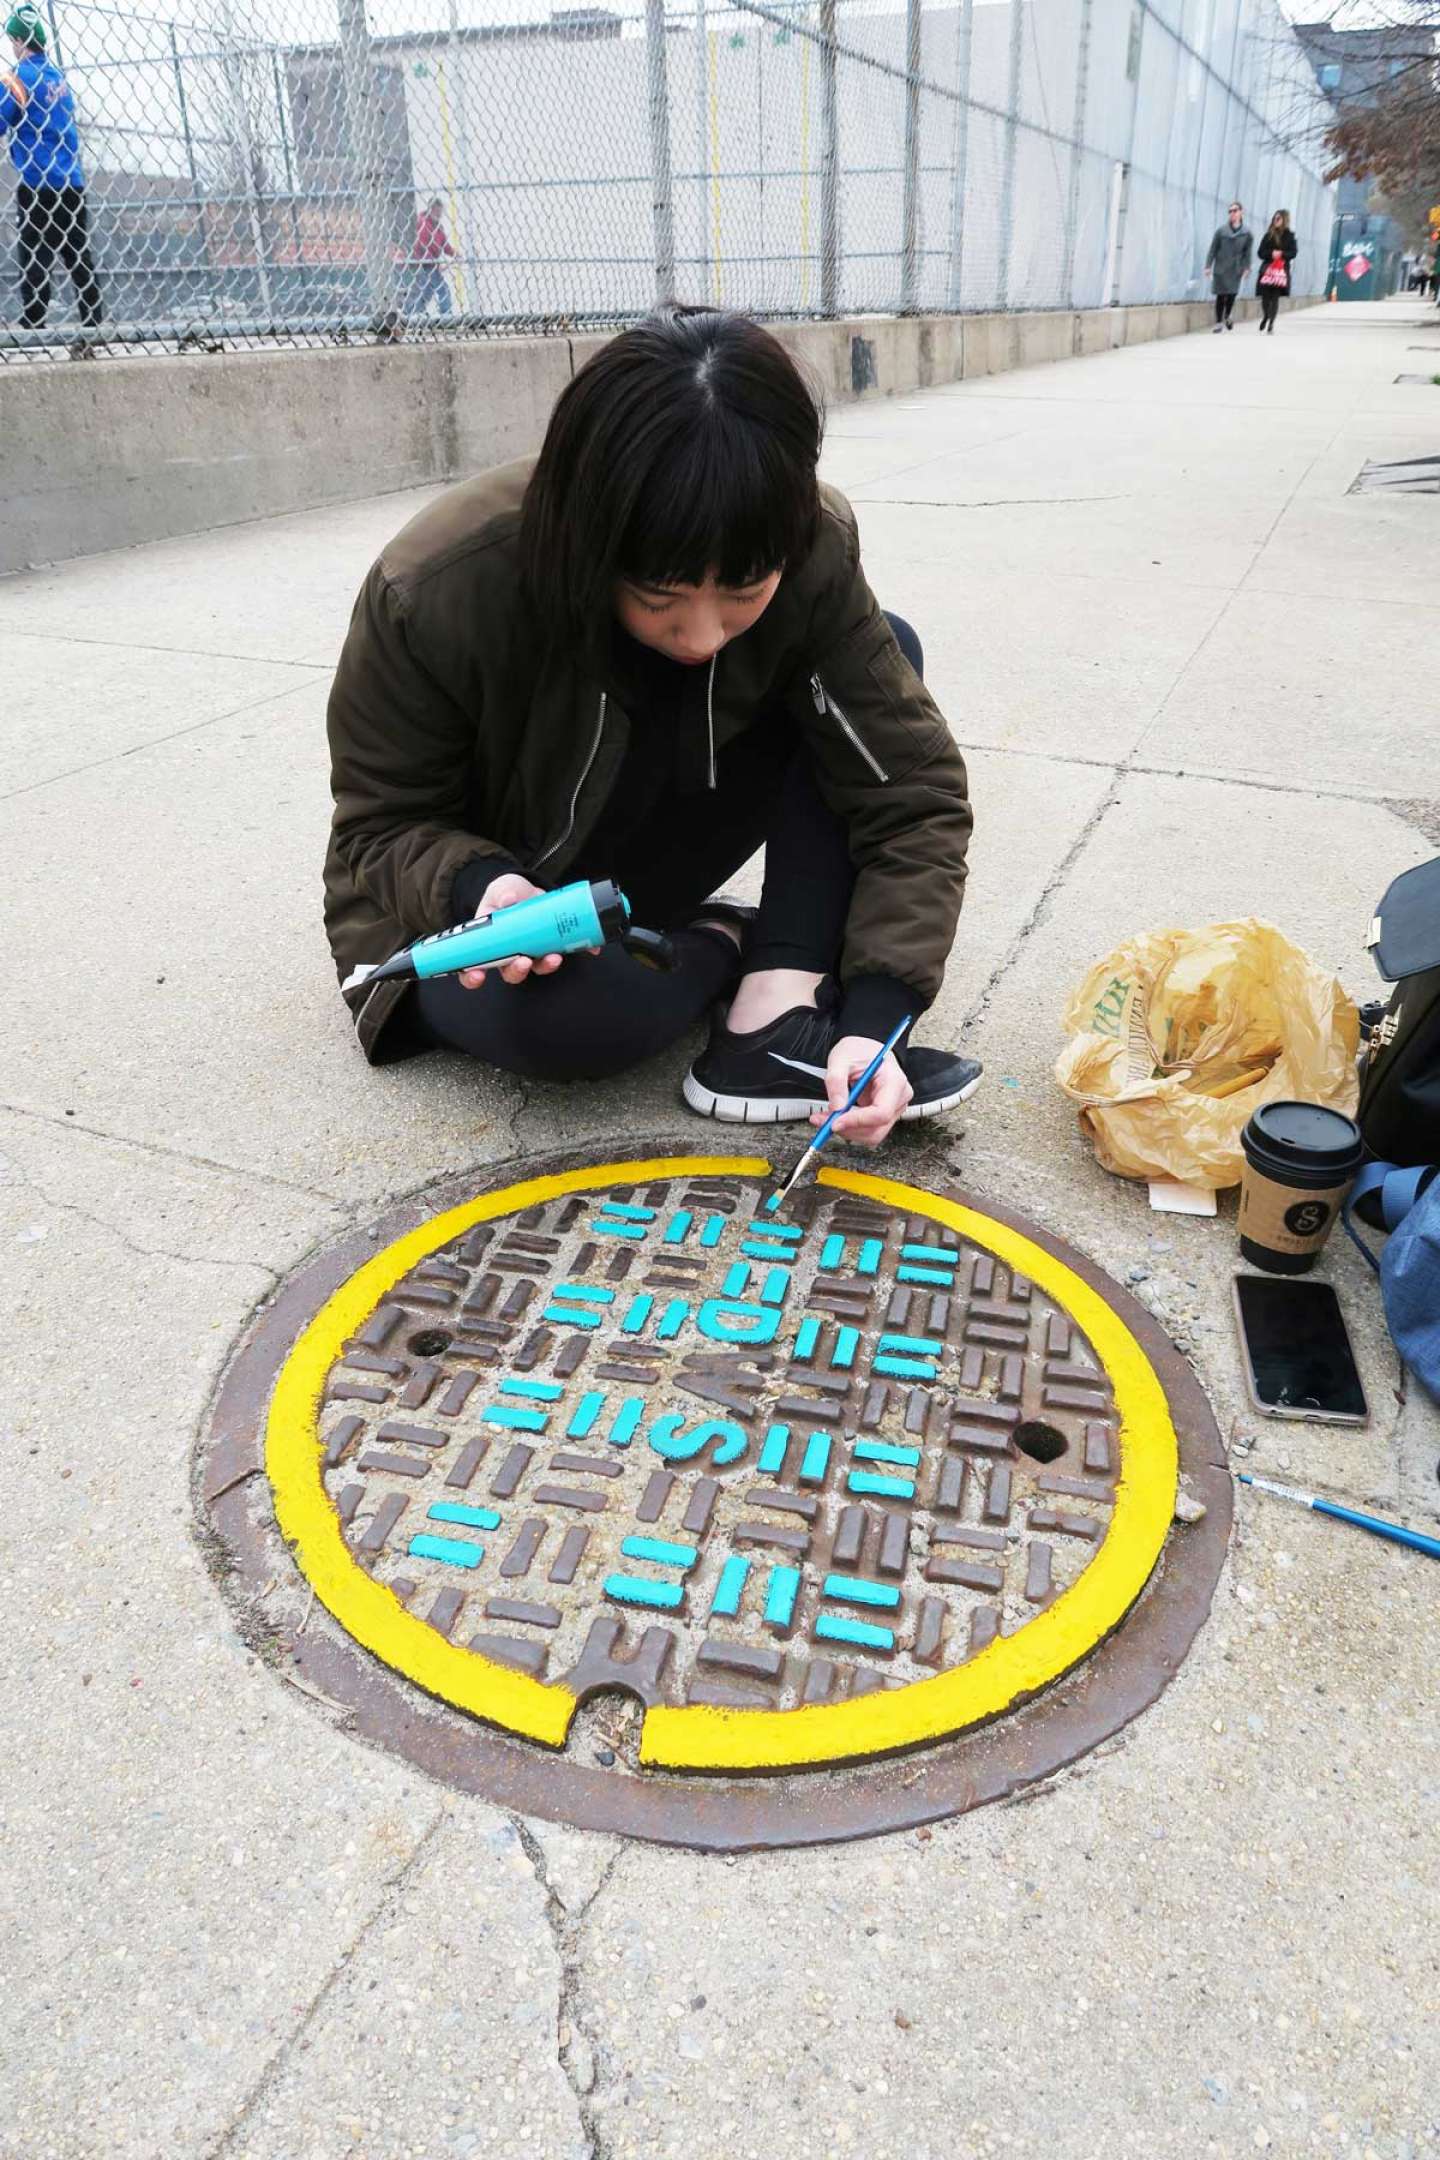 ◯ PAINTING DRAIN COVERS IN NYC ◯